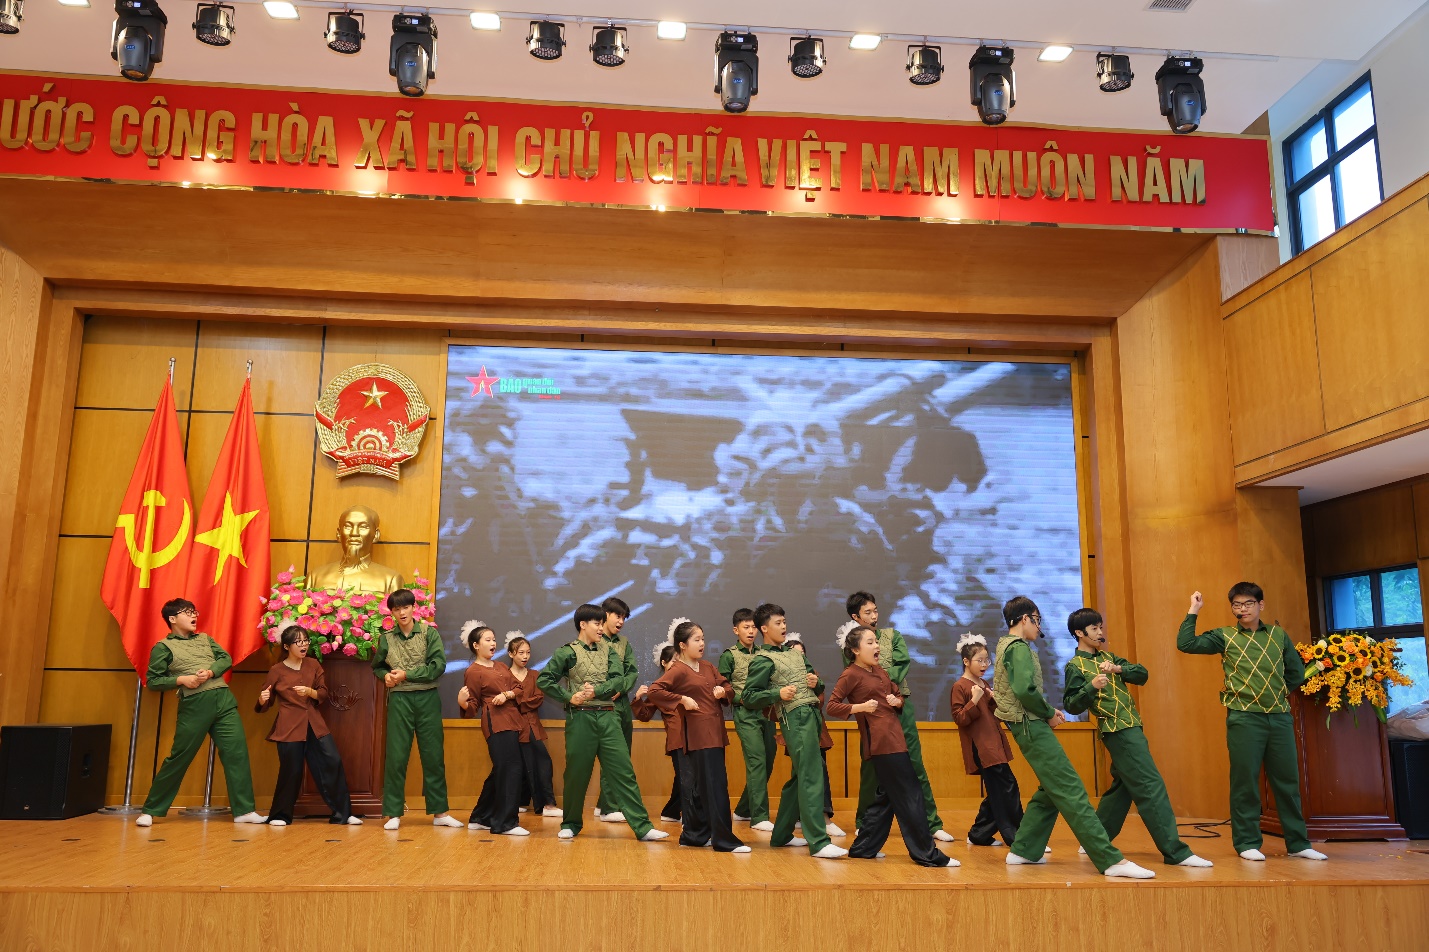 A group of people in green uniforms on a stage

Description automatically generated